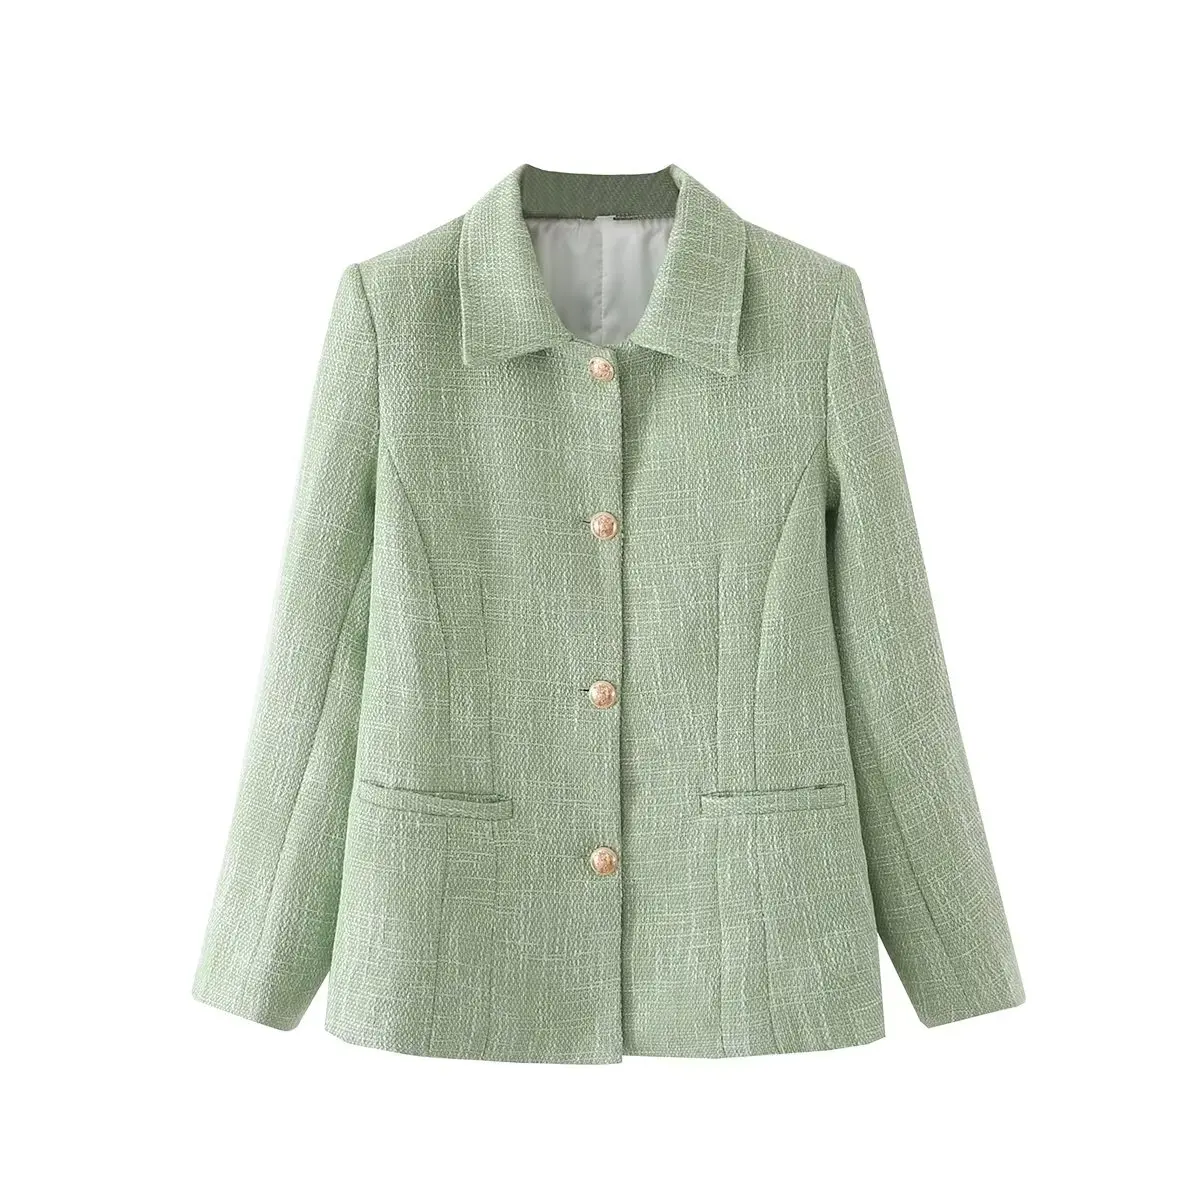 

BM&MD&ZA2022 early autumn new European and American style women's retro temperament woolen jacket single-breasted suit jacket